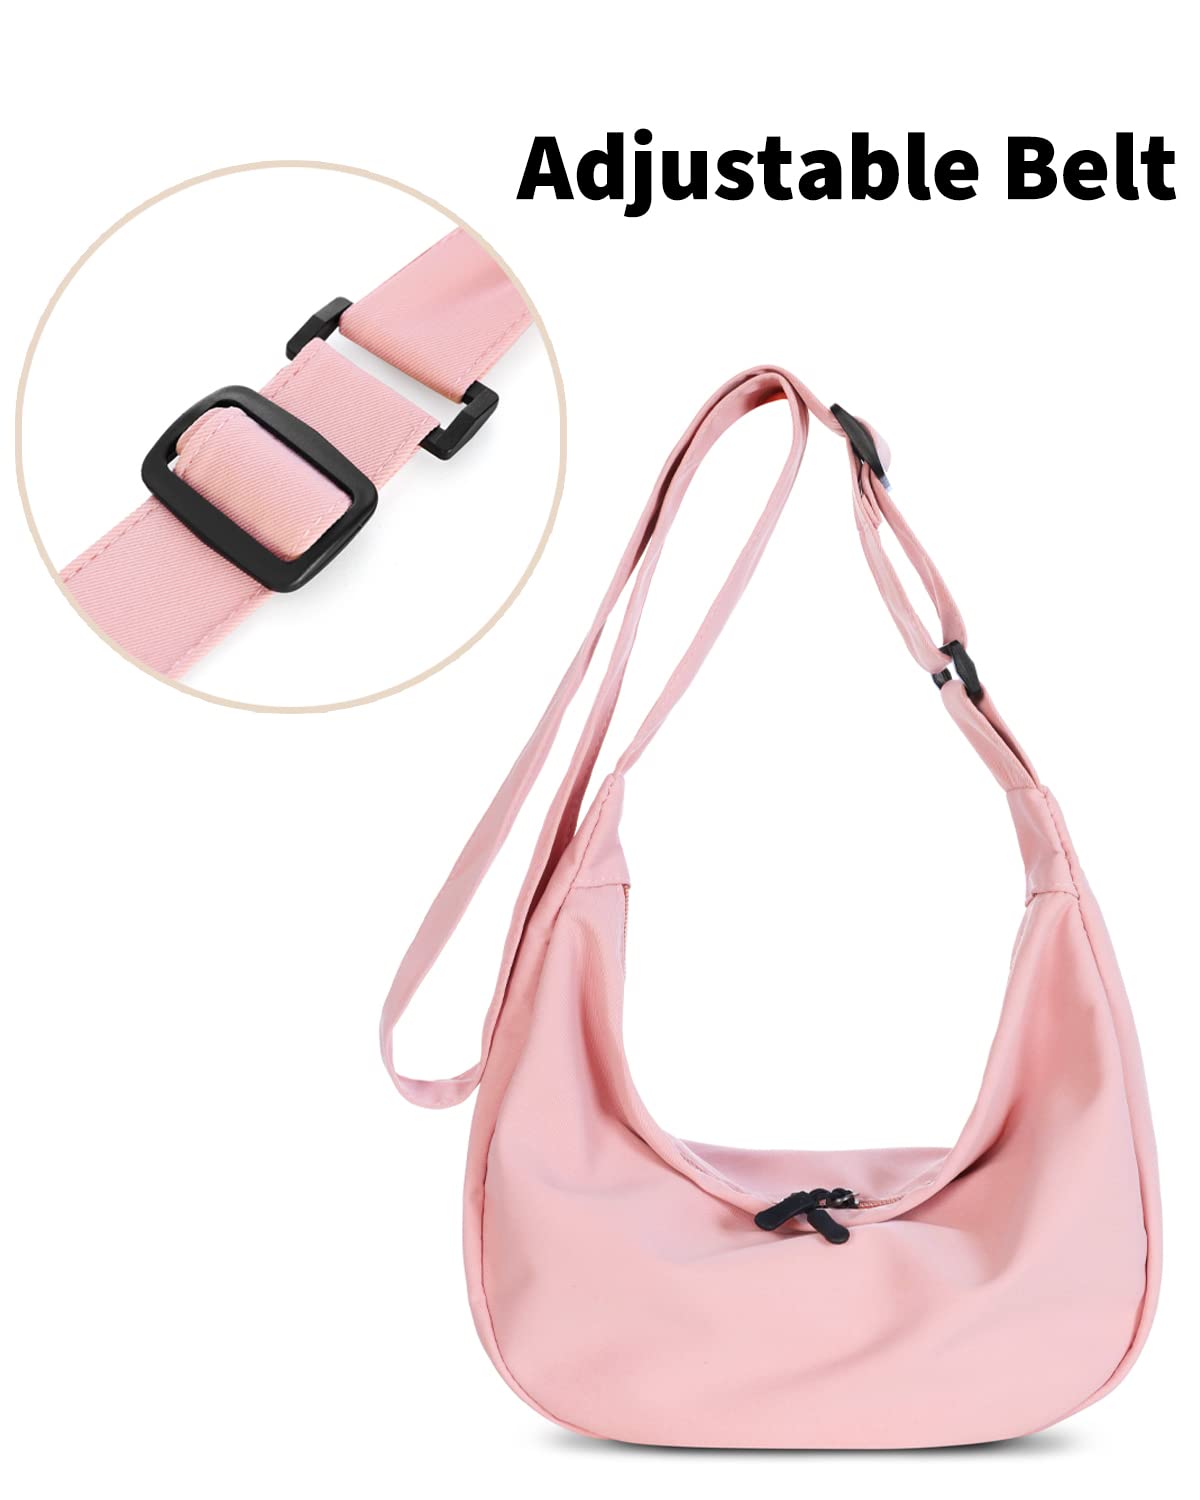 Small Sling Crossbody Bag for women man, Small Crescent Bag with Adjustable Strap, 2- Zipper Lightweight Nylon Shoulder Bag for School Sport Causal Travel Hiking Workout, Pink